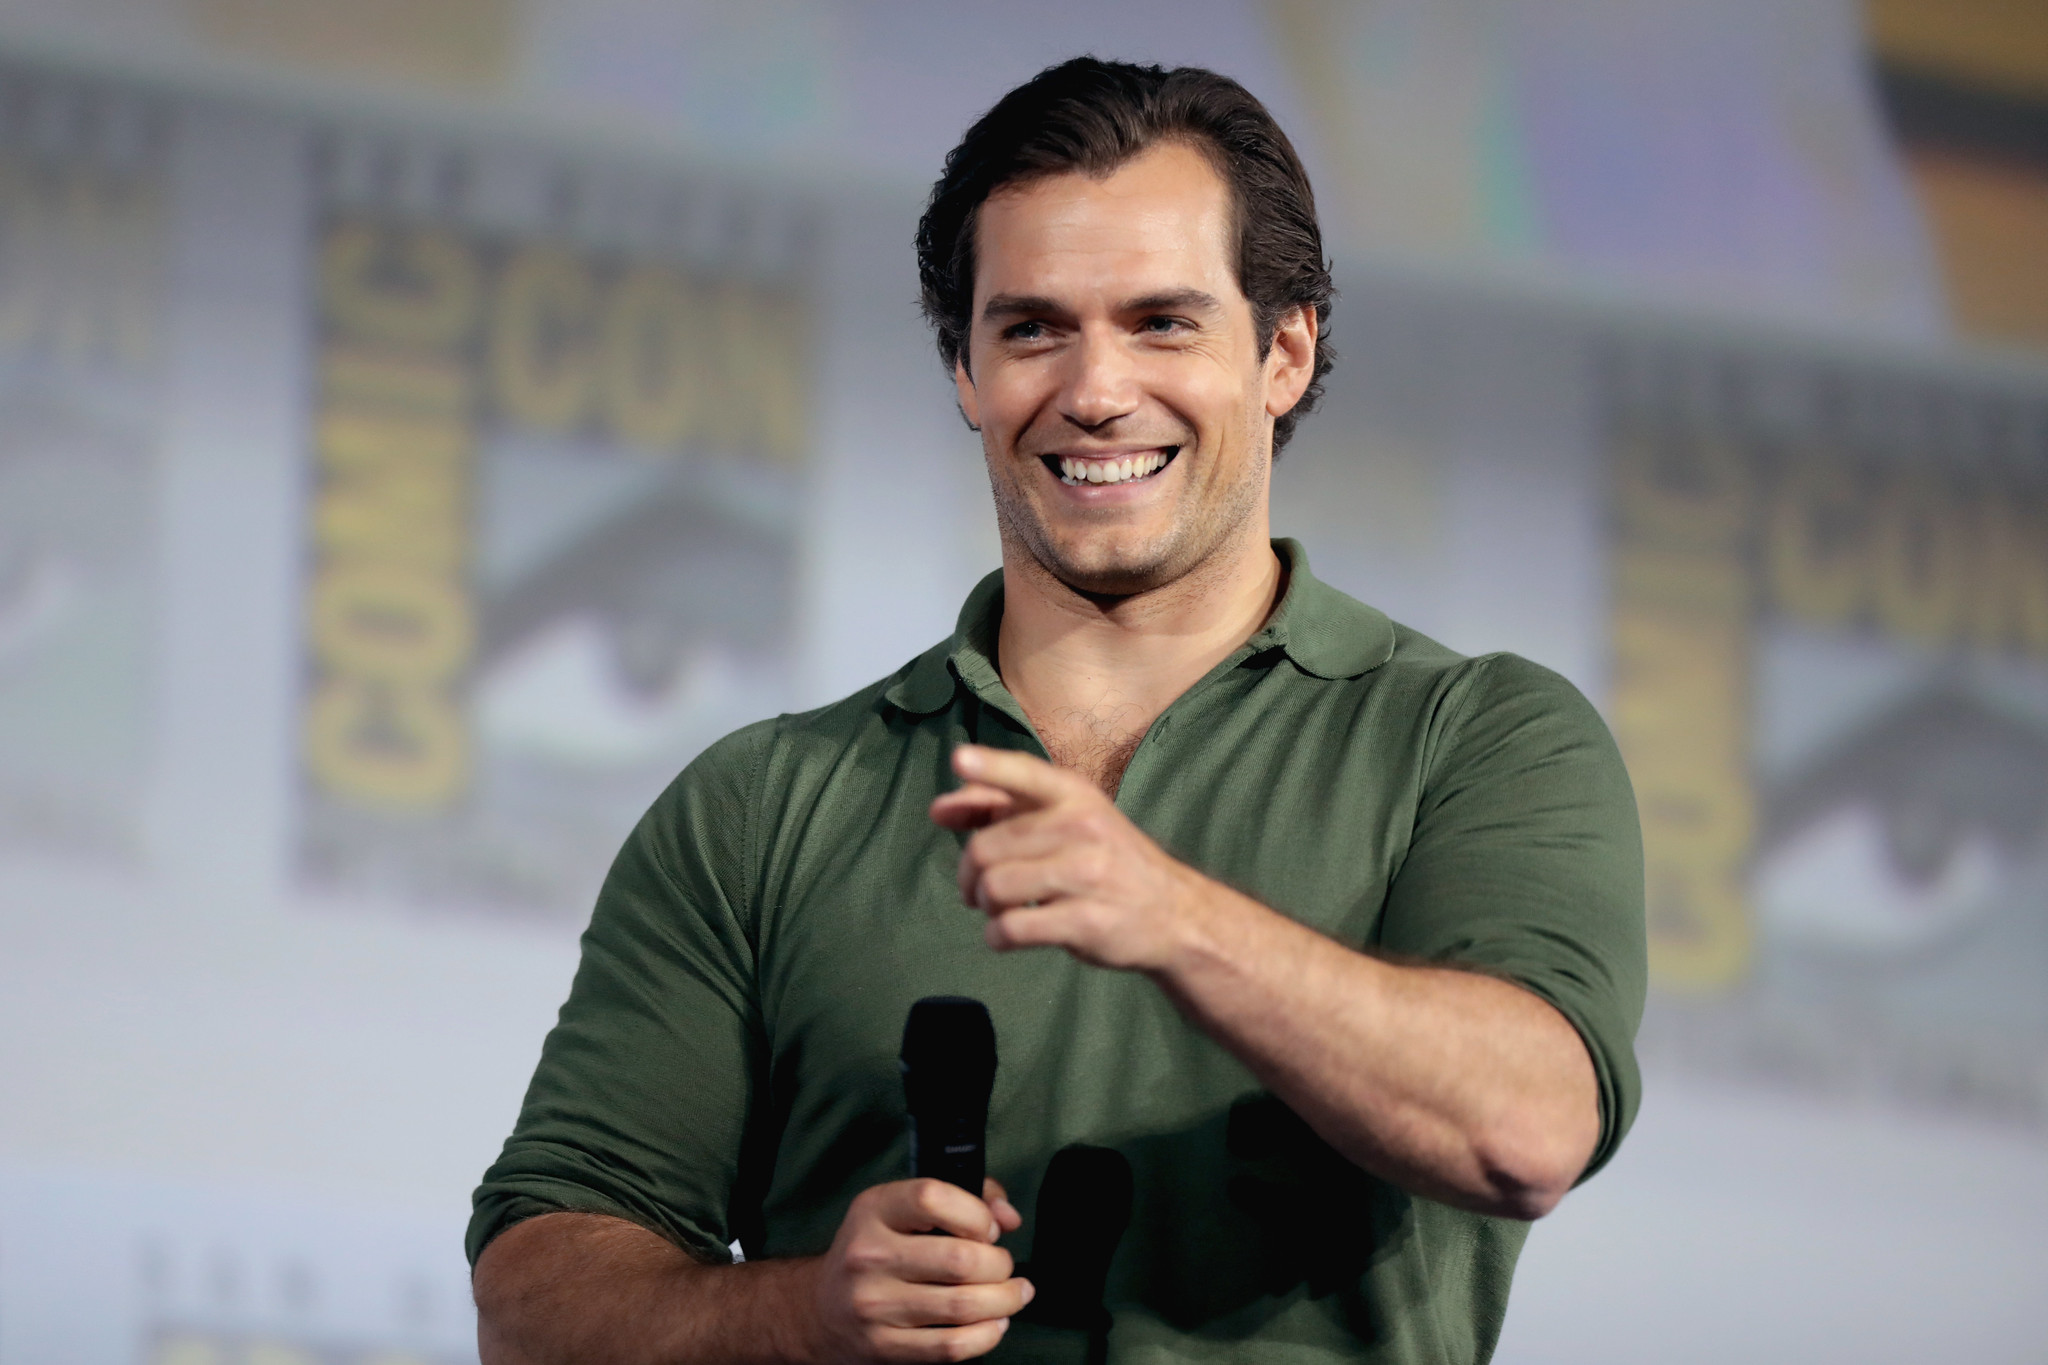 Henry Cavill Gently Corrects TV Host: It's Warhammer, Not Warcraft